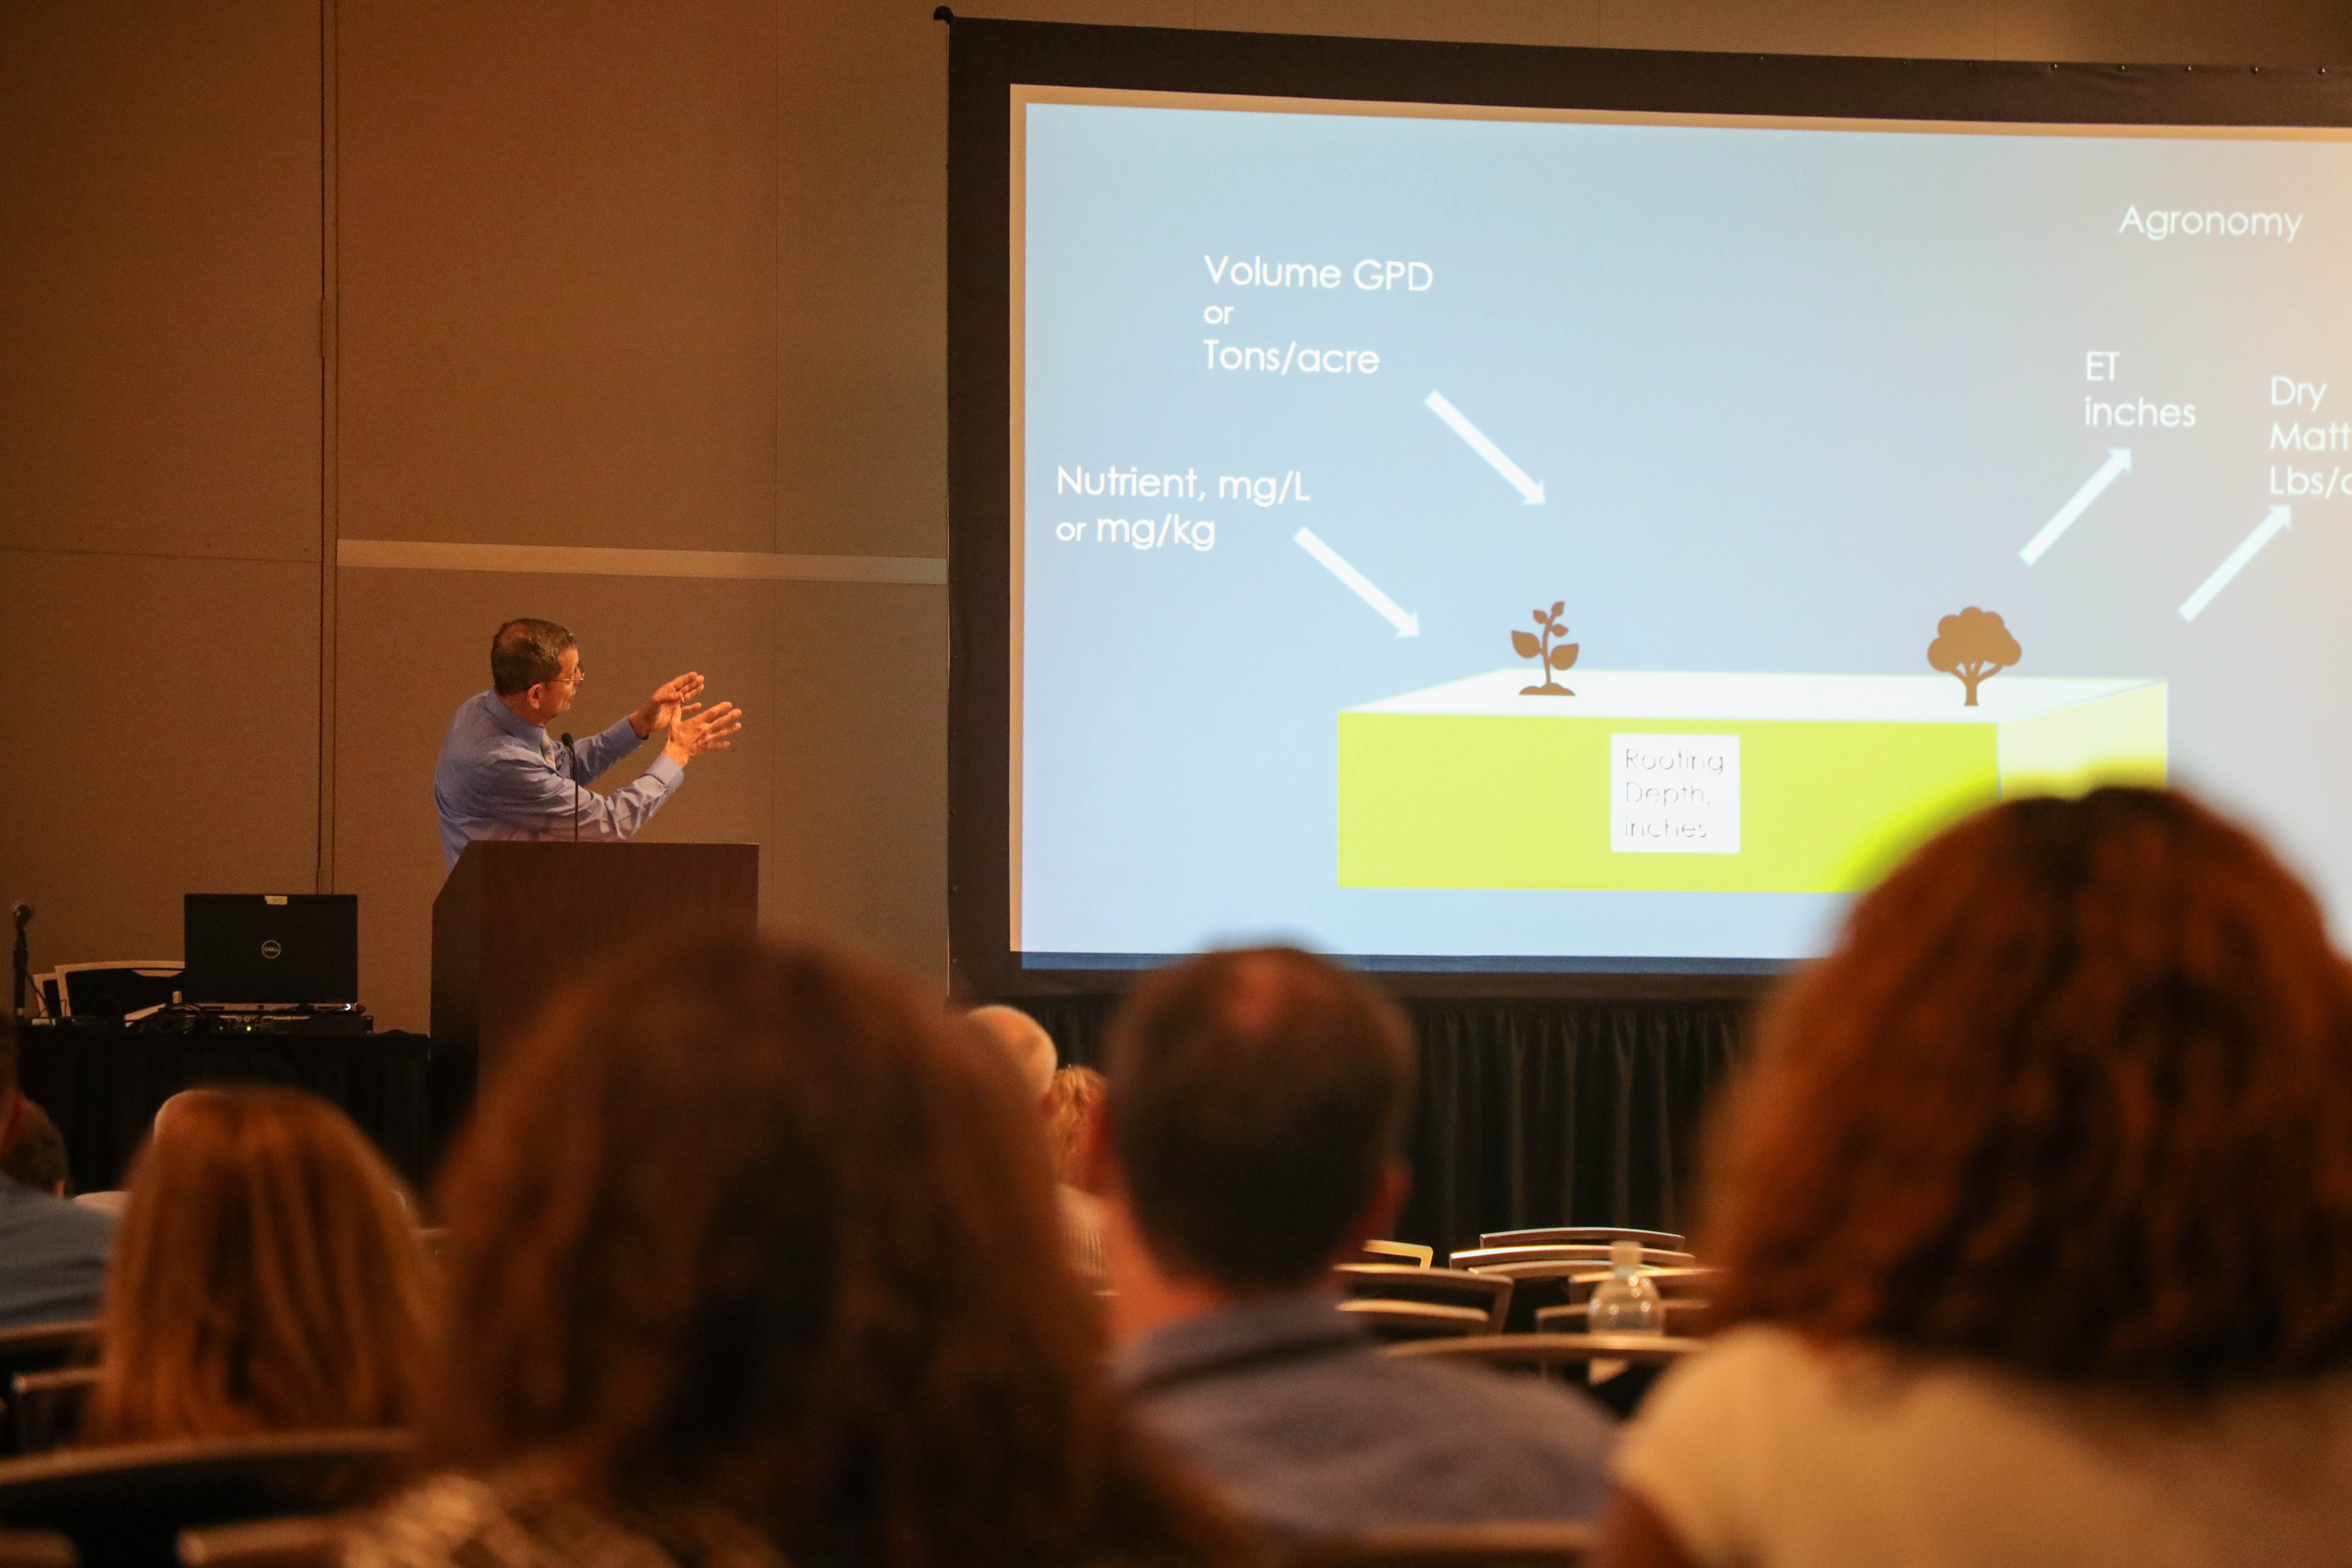 A picture showing a person giving a presentation at one of the educational sessions.